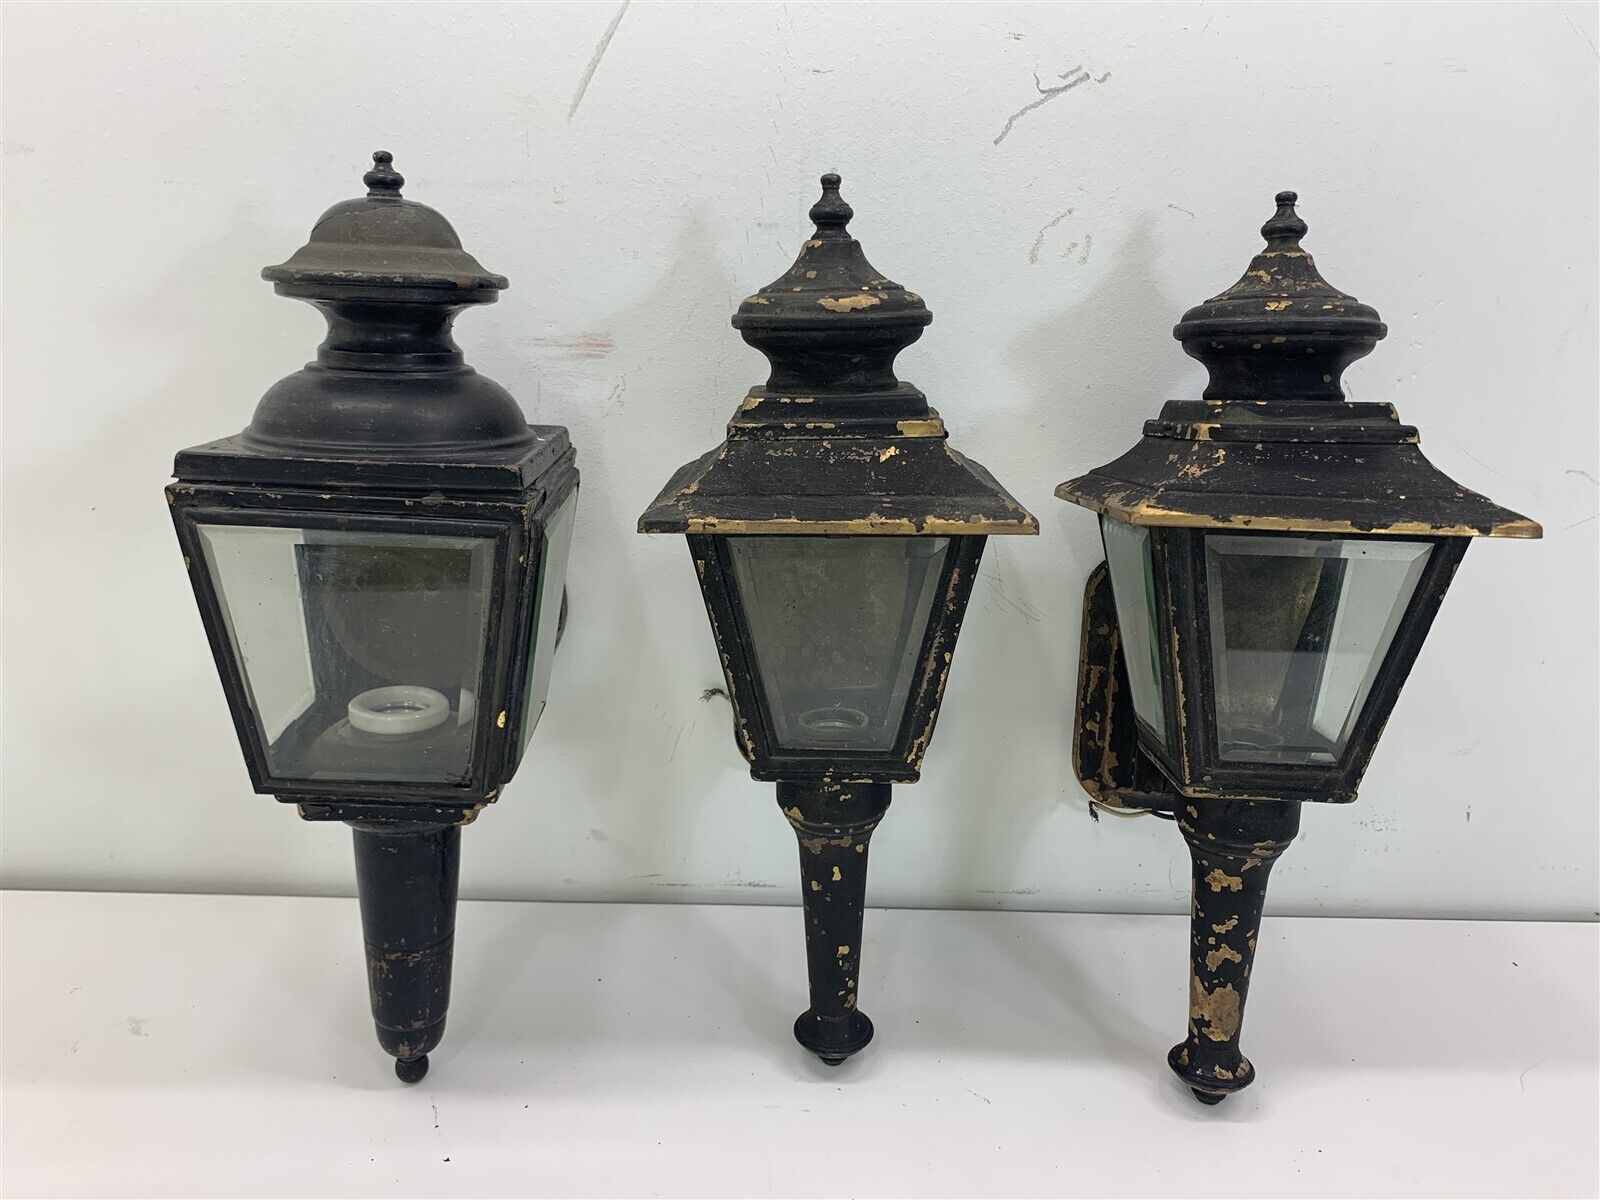 QTY 3 Black Painted Brass Vintage Carriage Lamps Lights Sconce Electric Gothic 